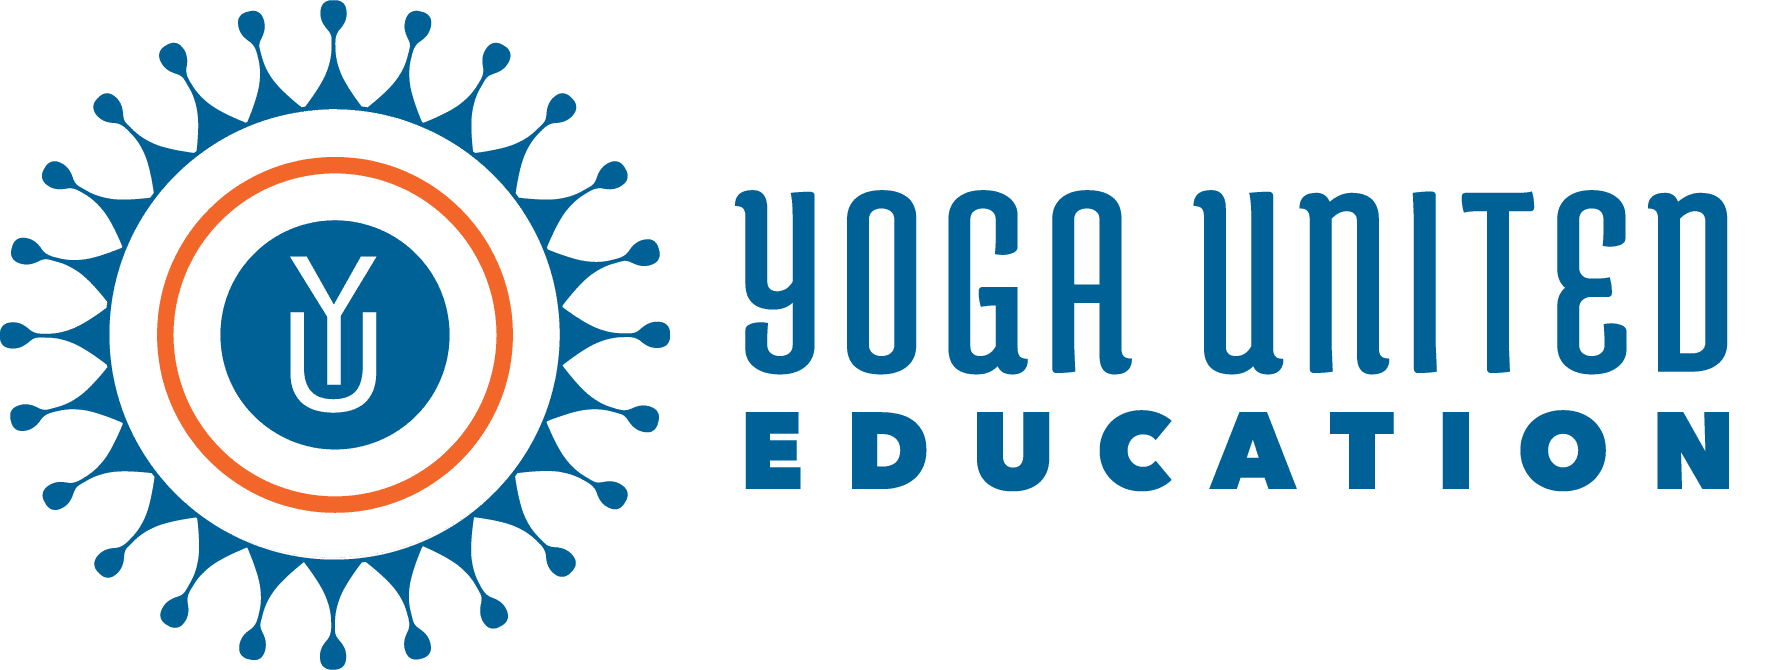 Qualities of a Yoga Therapist - The Yoga Therapy Institute